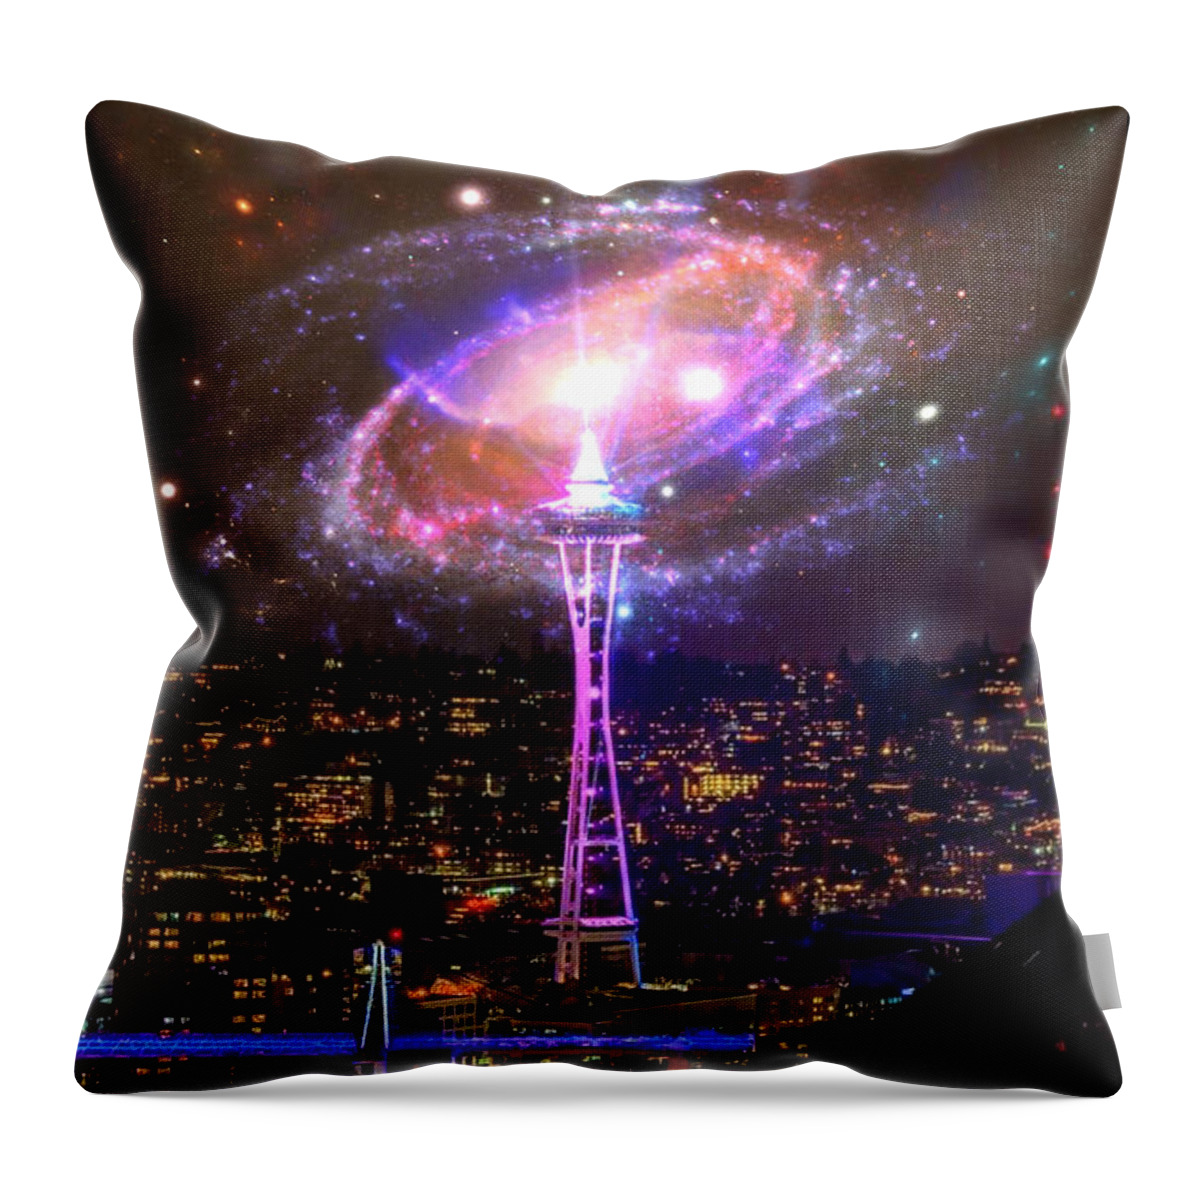 Seattle Throw Pillow featuring the digital art Happy New Year by Paisley O'Farrell